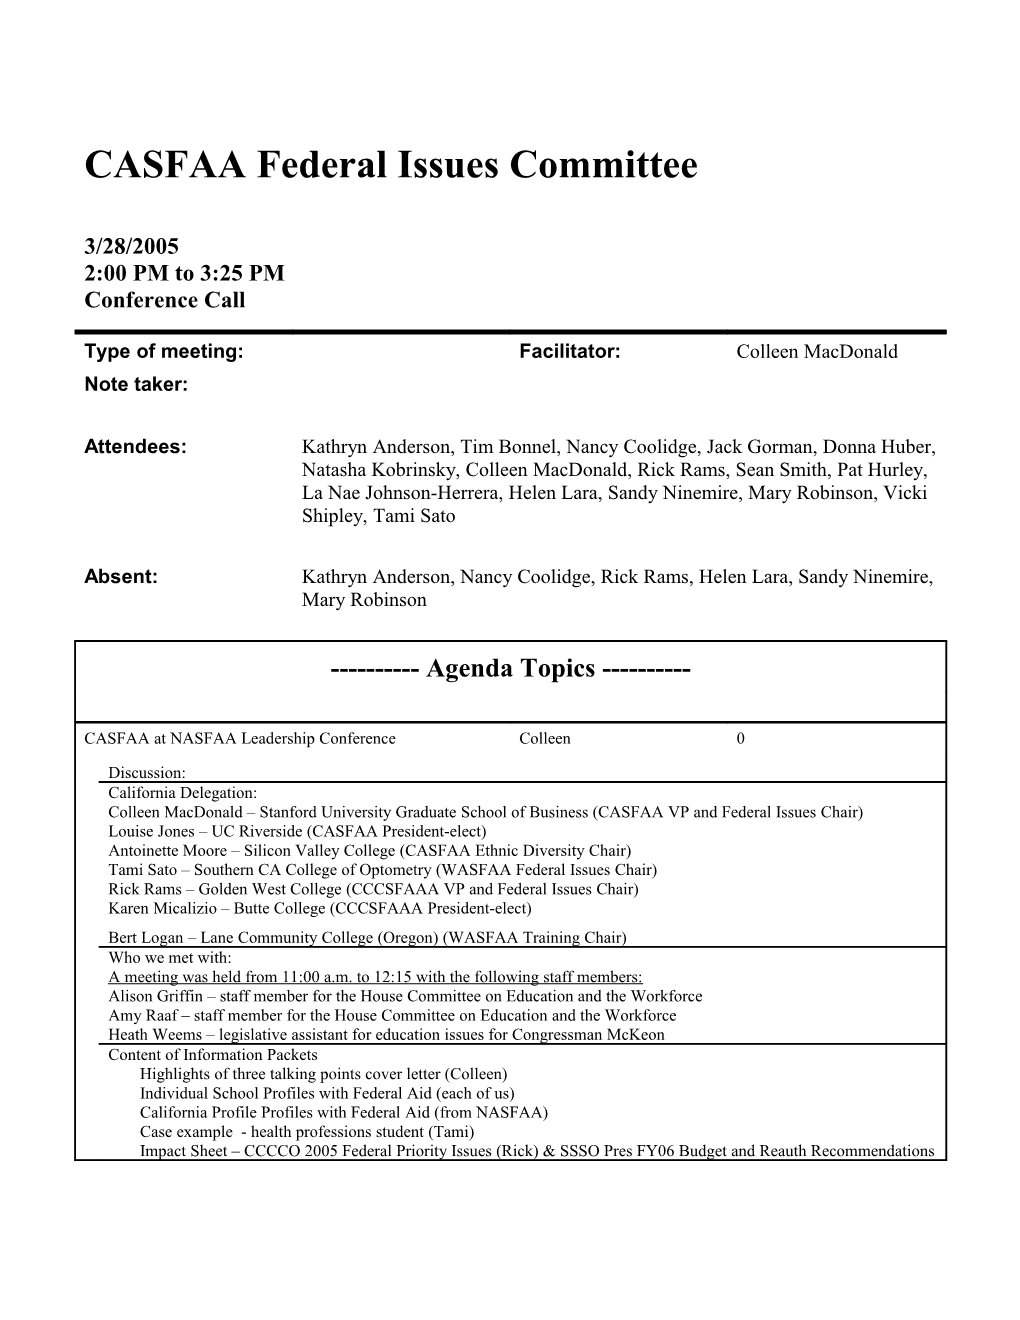 CASFAA Federal Issues Committee s1